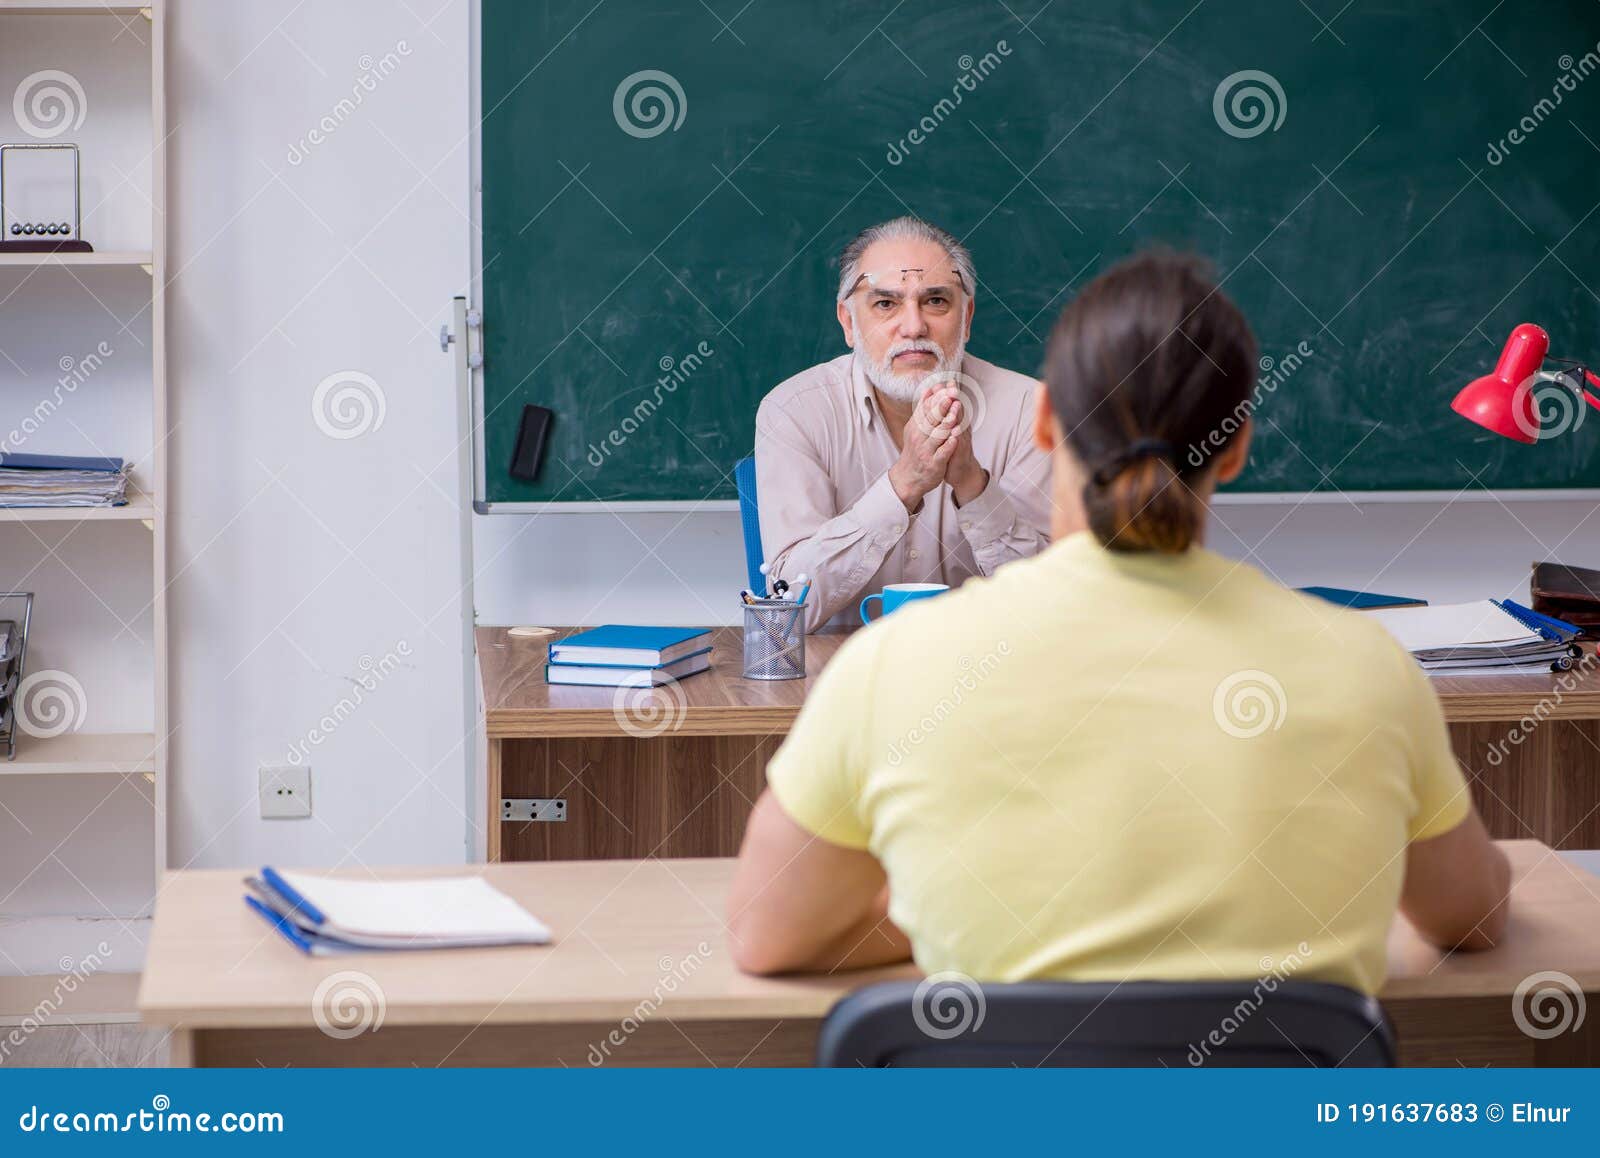 Old Teacher And Young Male Student In The Classroom Stock Image Image